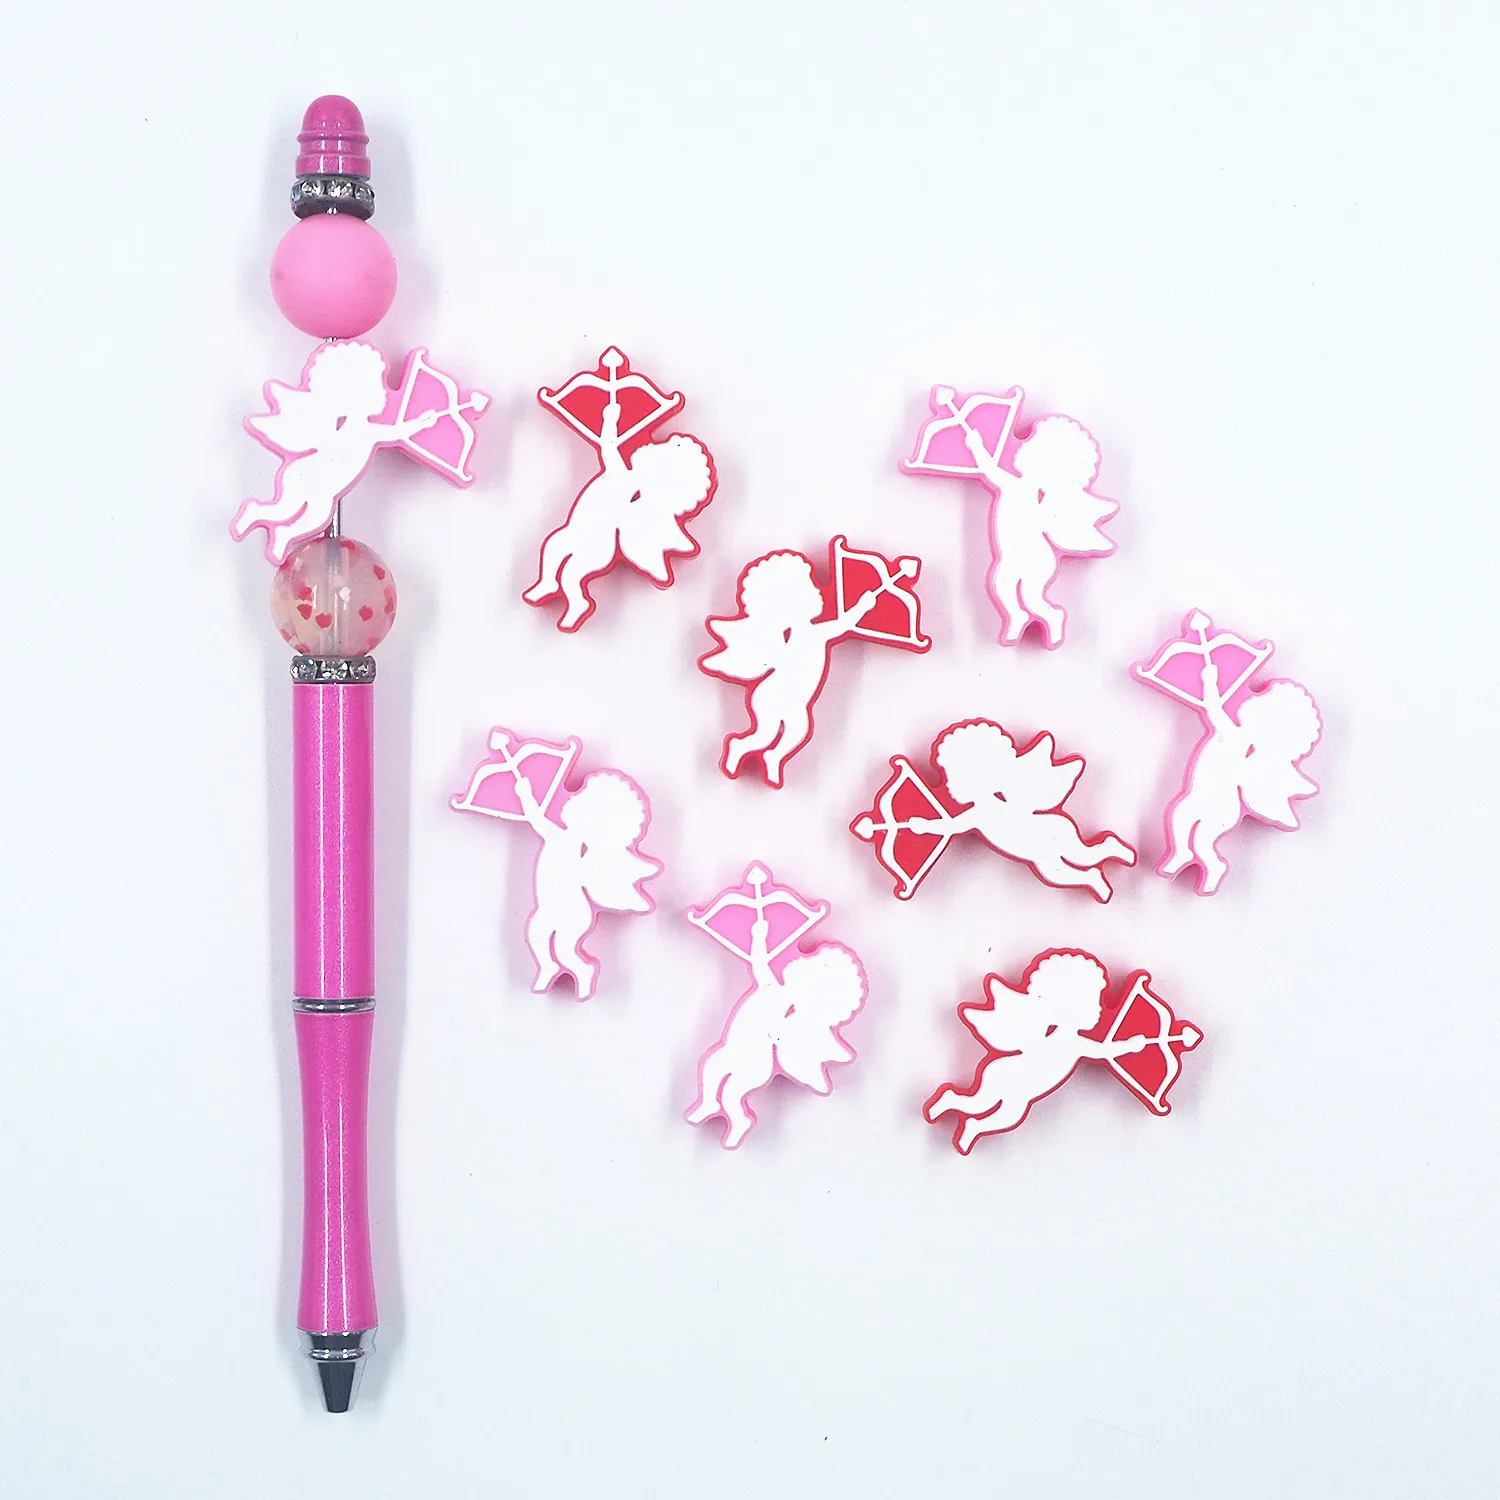 chenkai-50pcs-cupid-silicone-focal-beads-for-beadable-pen-valentine's-day-silicone-charms-for-pen-making-character-beads